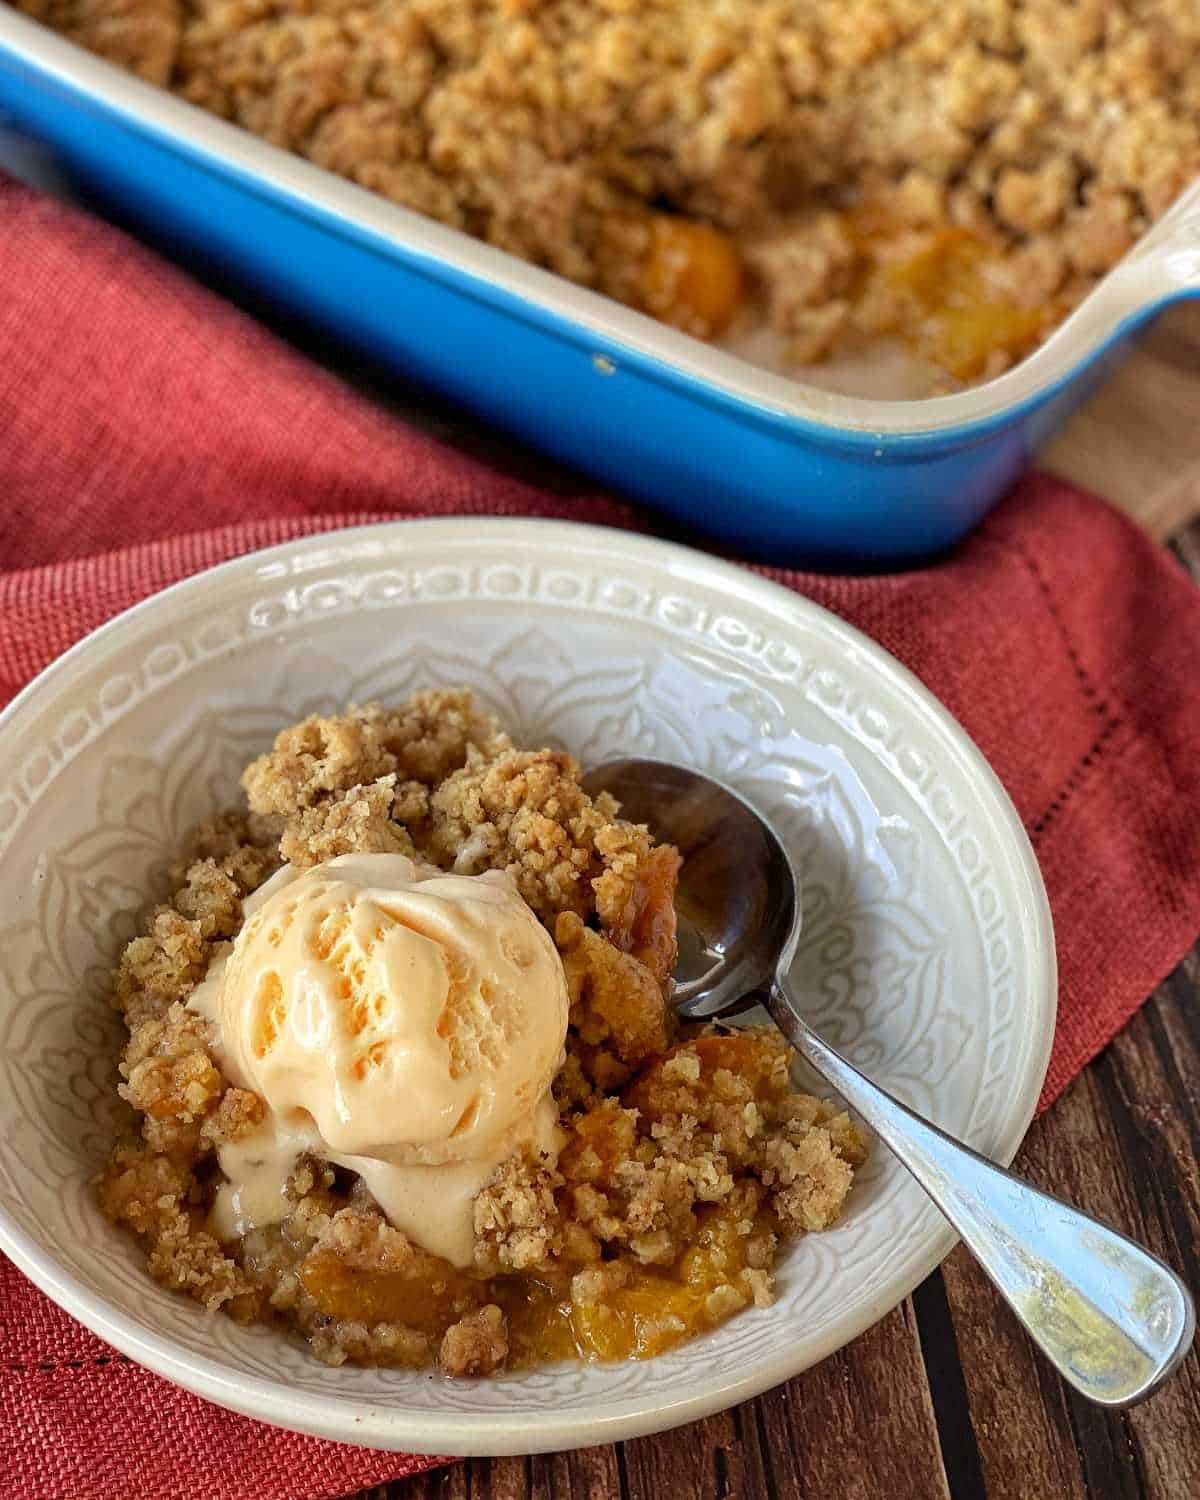 Apricot crumble served with vanilla ice cream in a white bowl